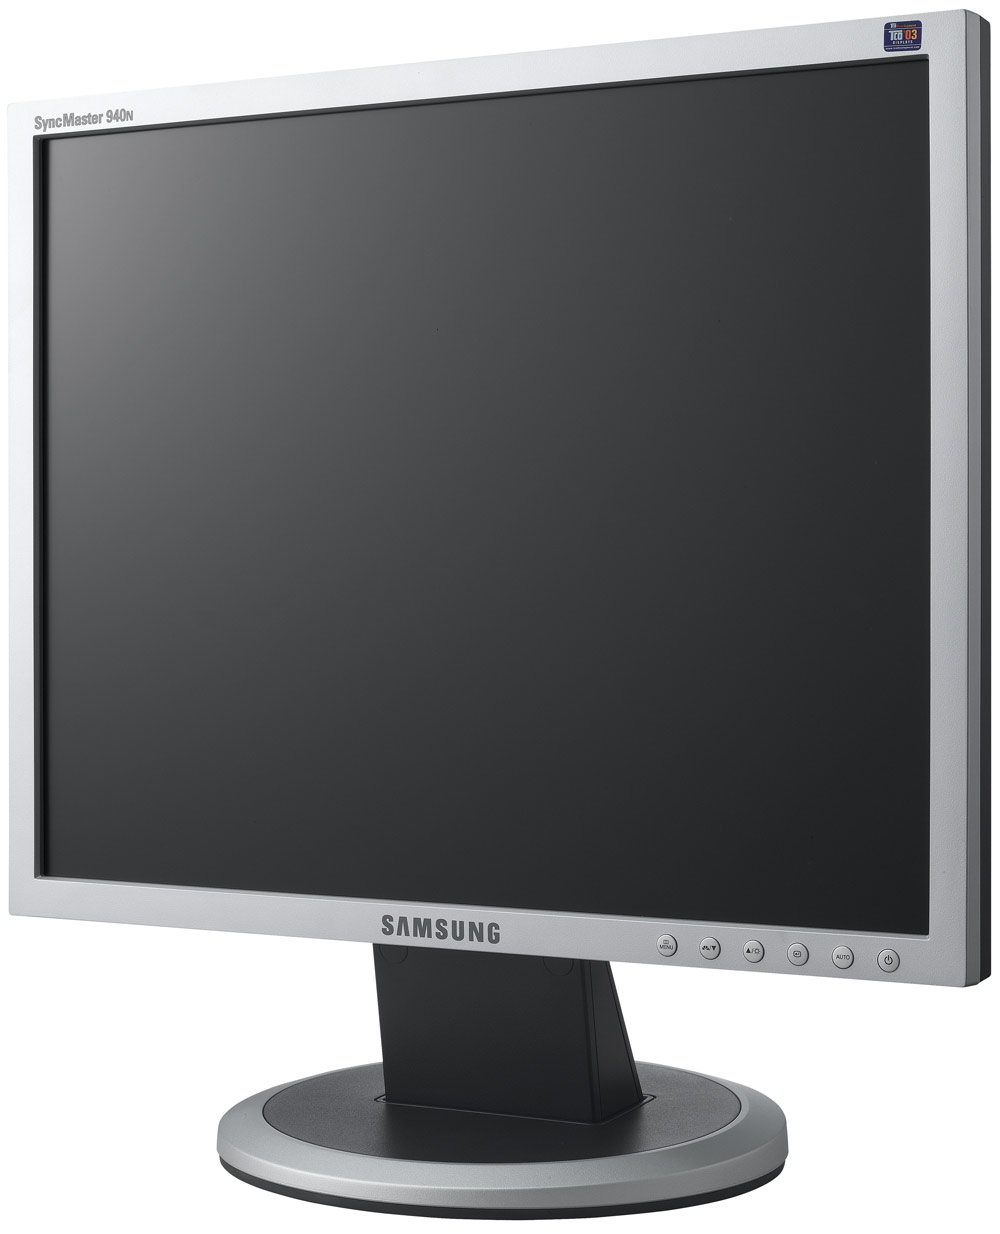 Samsung Syncmaster P2350 Driver Download